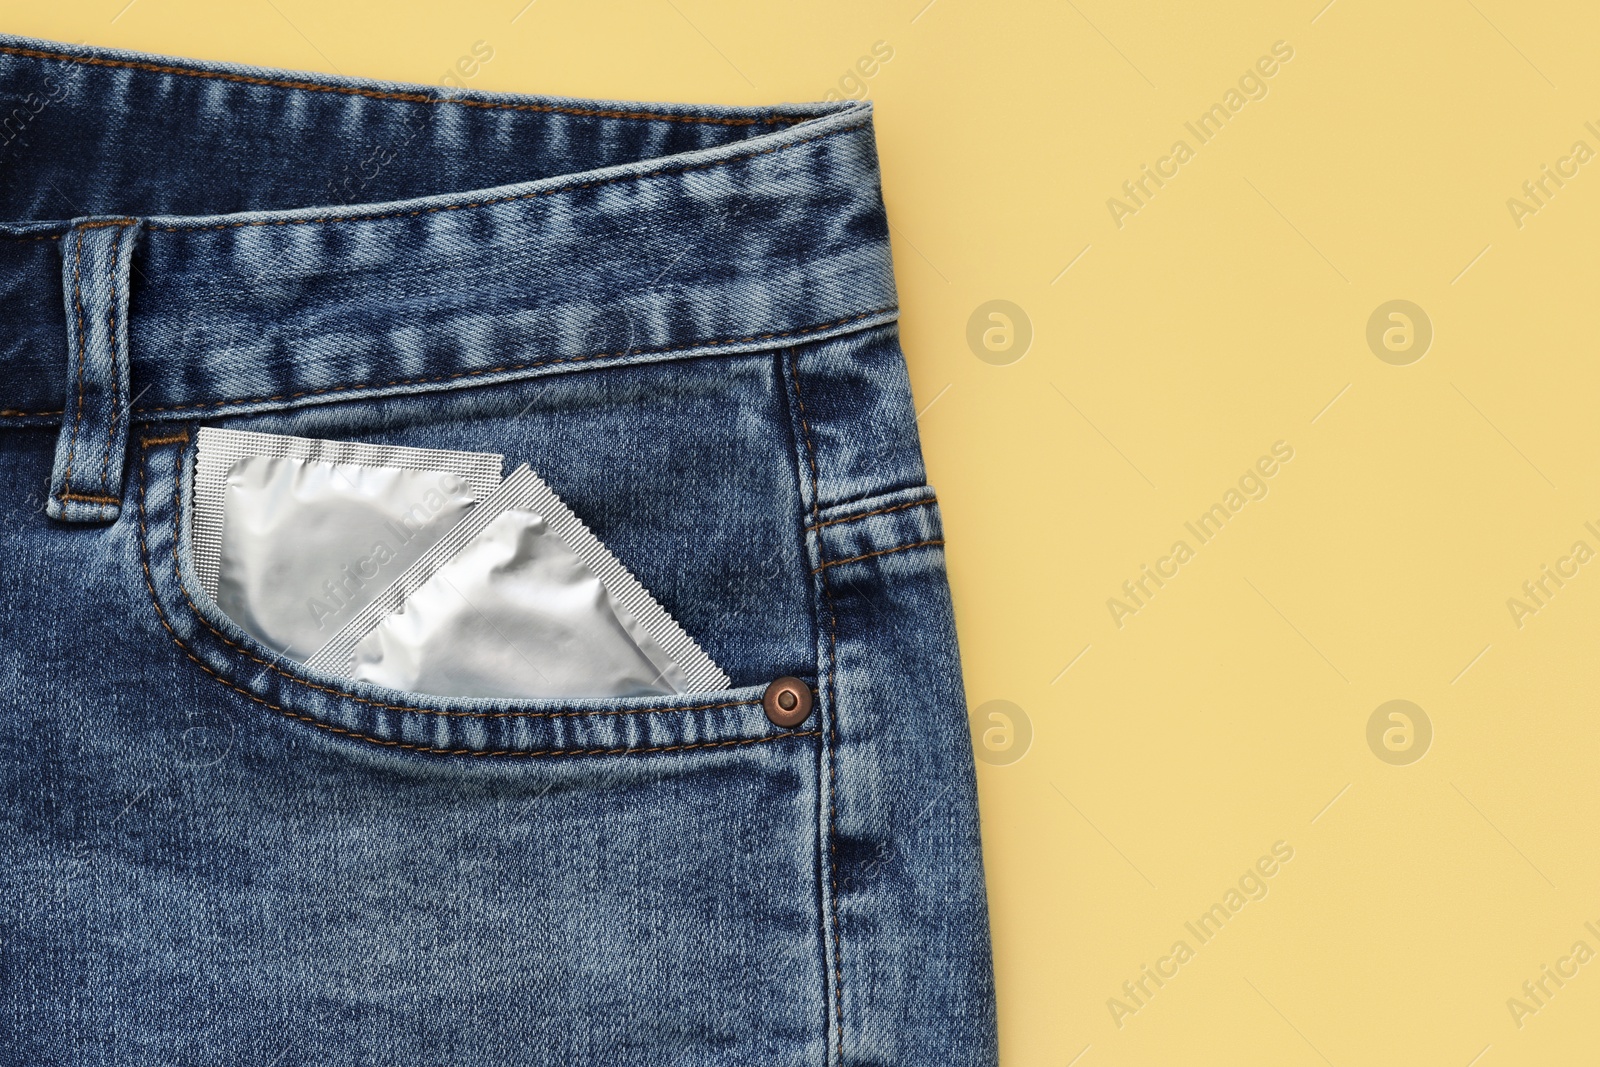 Photo of Packaged condoms in jeans pocket on beige background, top view. Safe sex